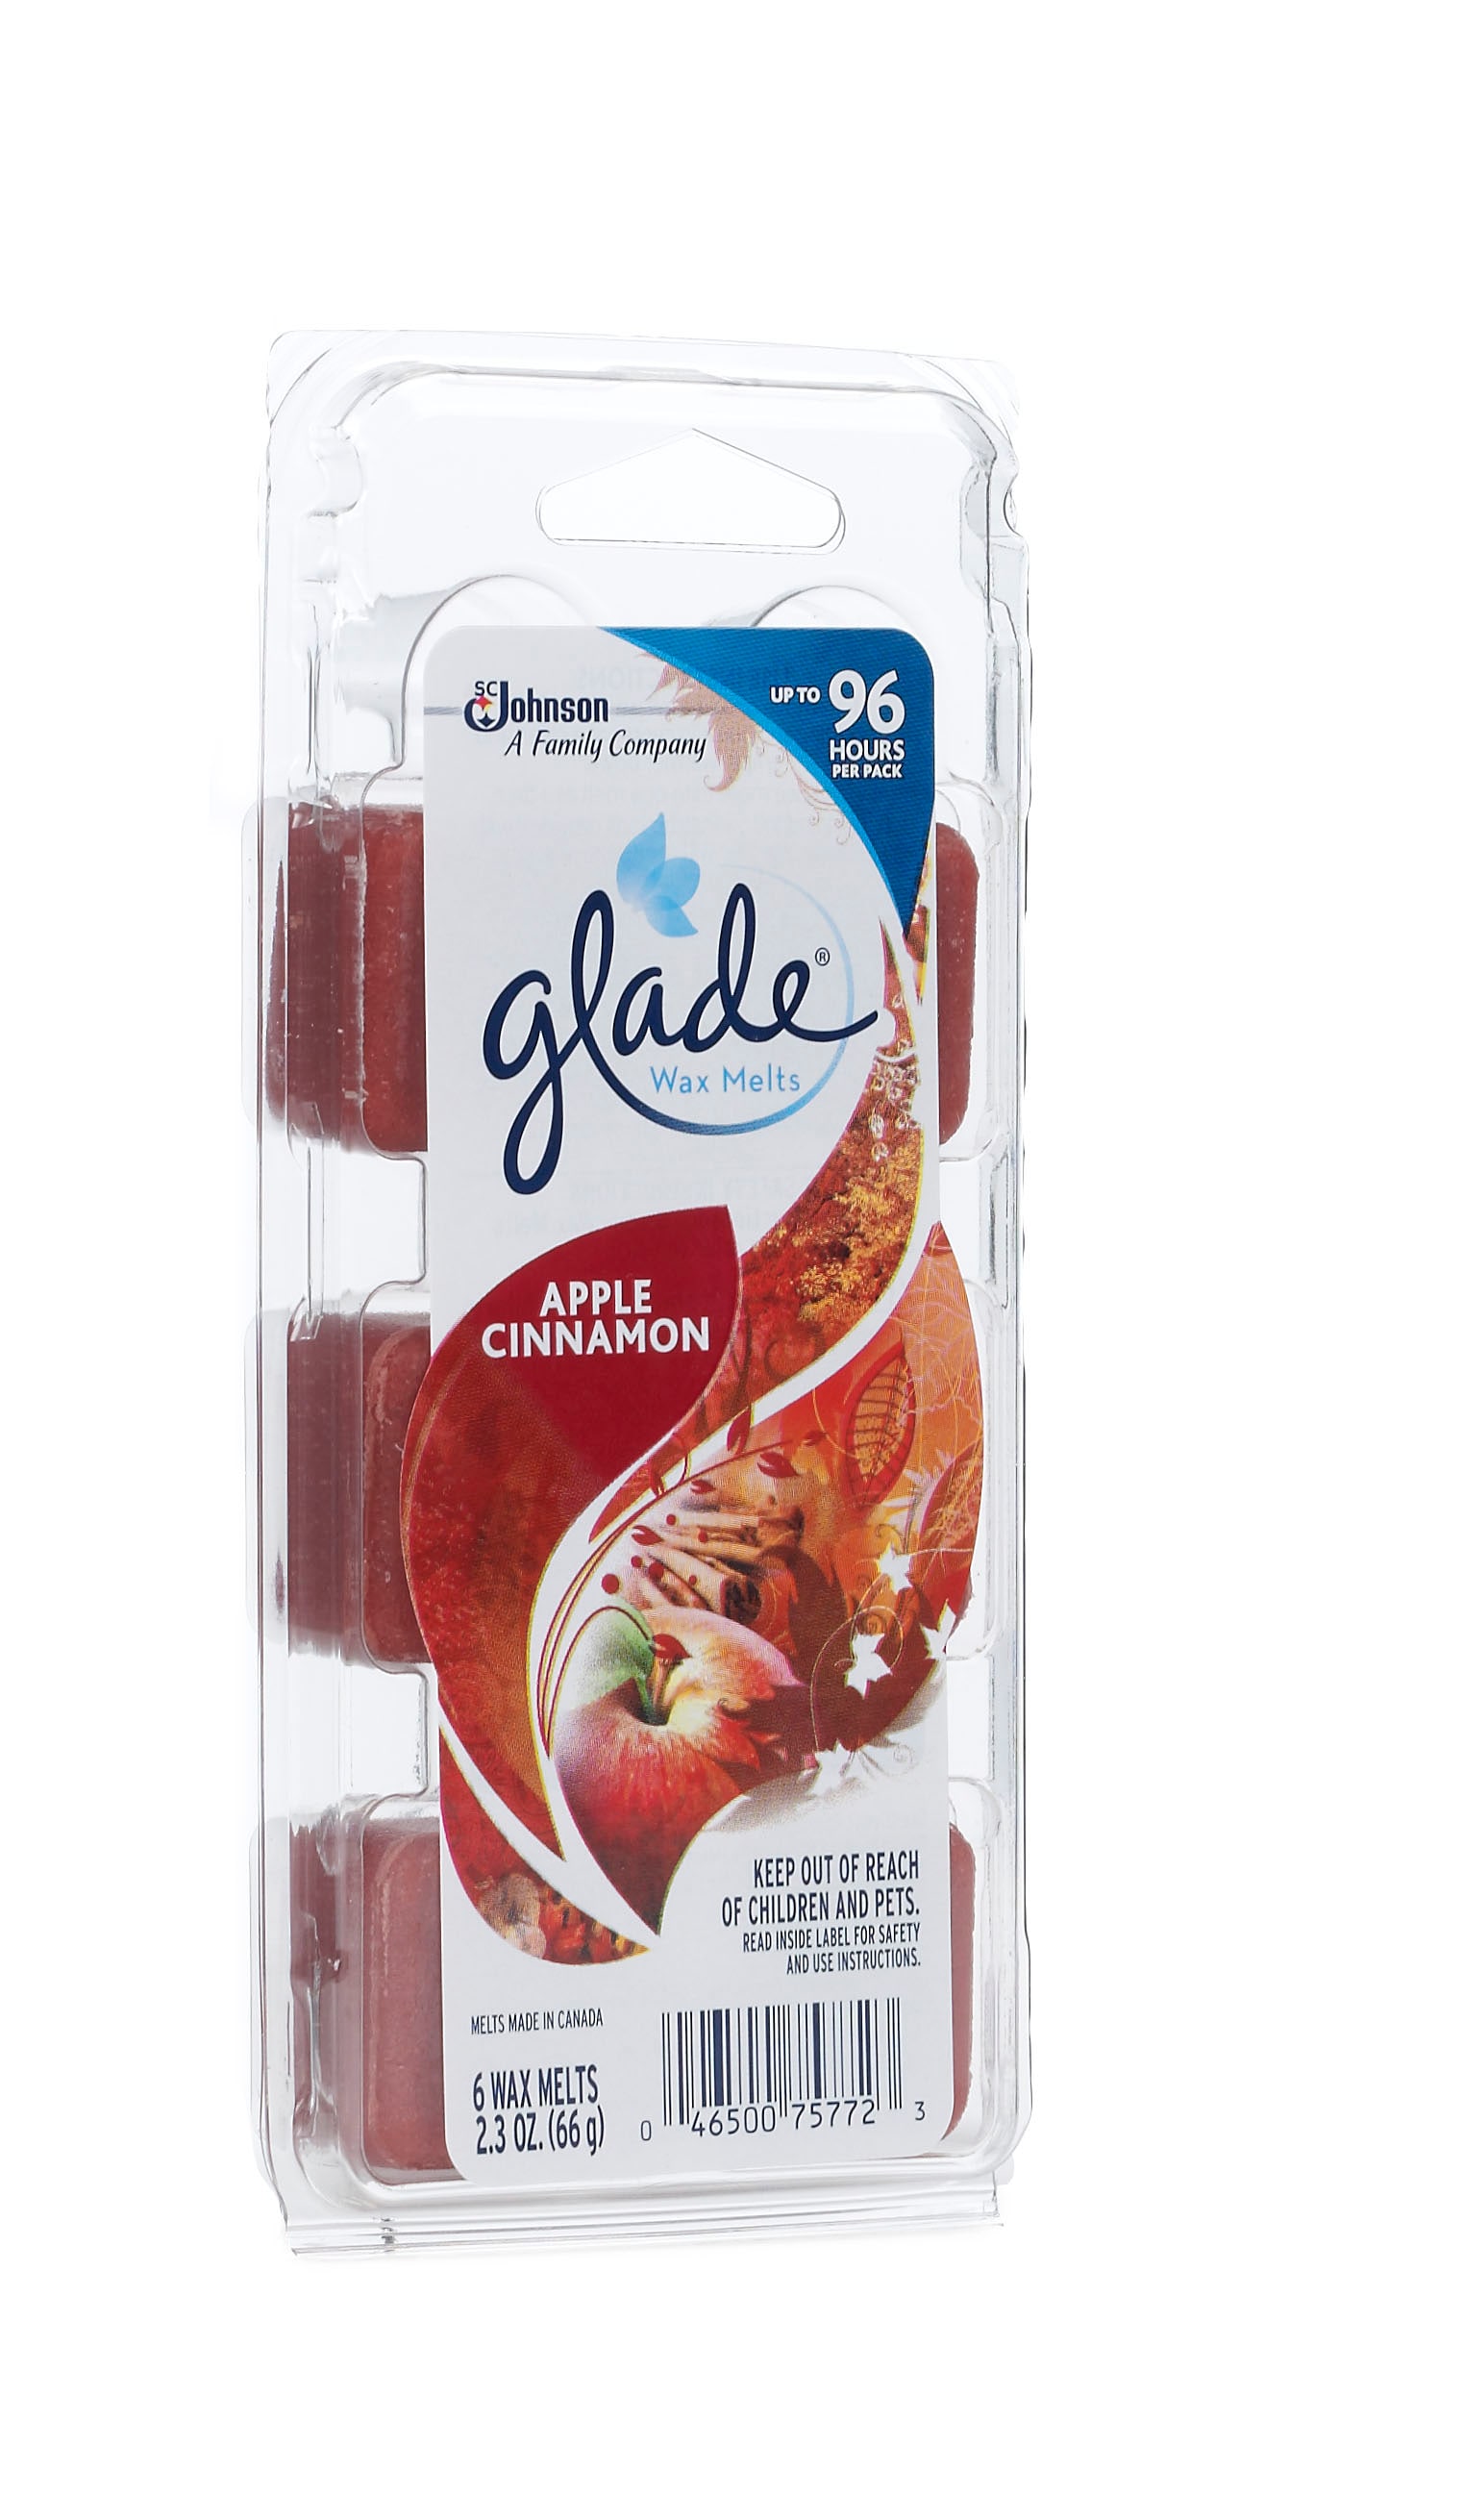 Glade Wax Melts 6-Pack Apple Cinnamon Plug-in Electric Air